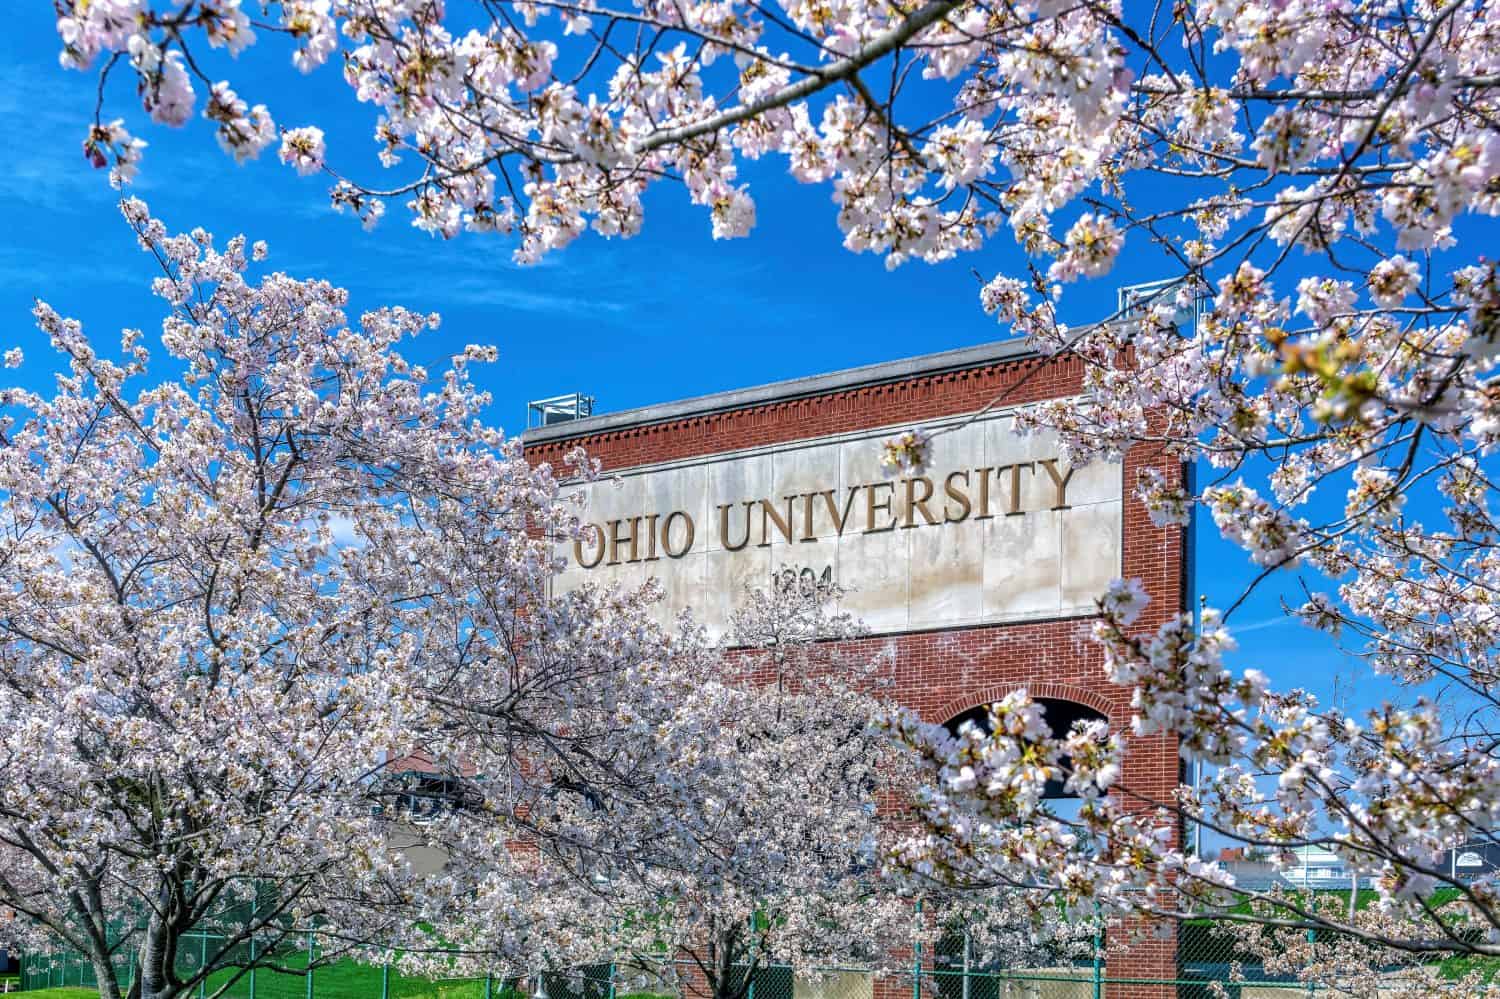 <p>Beginning in late March and into mid-April, cherry blossom trees bloom in Athens. One of the best places to view the blooms is at Ohio University where about 200 cherry blossom trees are planted around the campus.</p><p>Sharks, lions, alligators, and more! Don’t miss today’s latest and most exciting animal news. <strong><a href="https://www.msn.com/en-us/channel/source/AZ%20Animals%20US/sr-vid-7etr9q8xun6k6508c3nufaum0de3dqktiq6h27ddeagnfug30wka">Click here to access the A-Z Animals profile page</a> and be sure to hit the <em>Follow</em> button here or at the top of this article!</strong></p> <p>Have feedback? Add a comment below!</p>